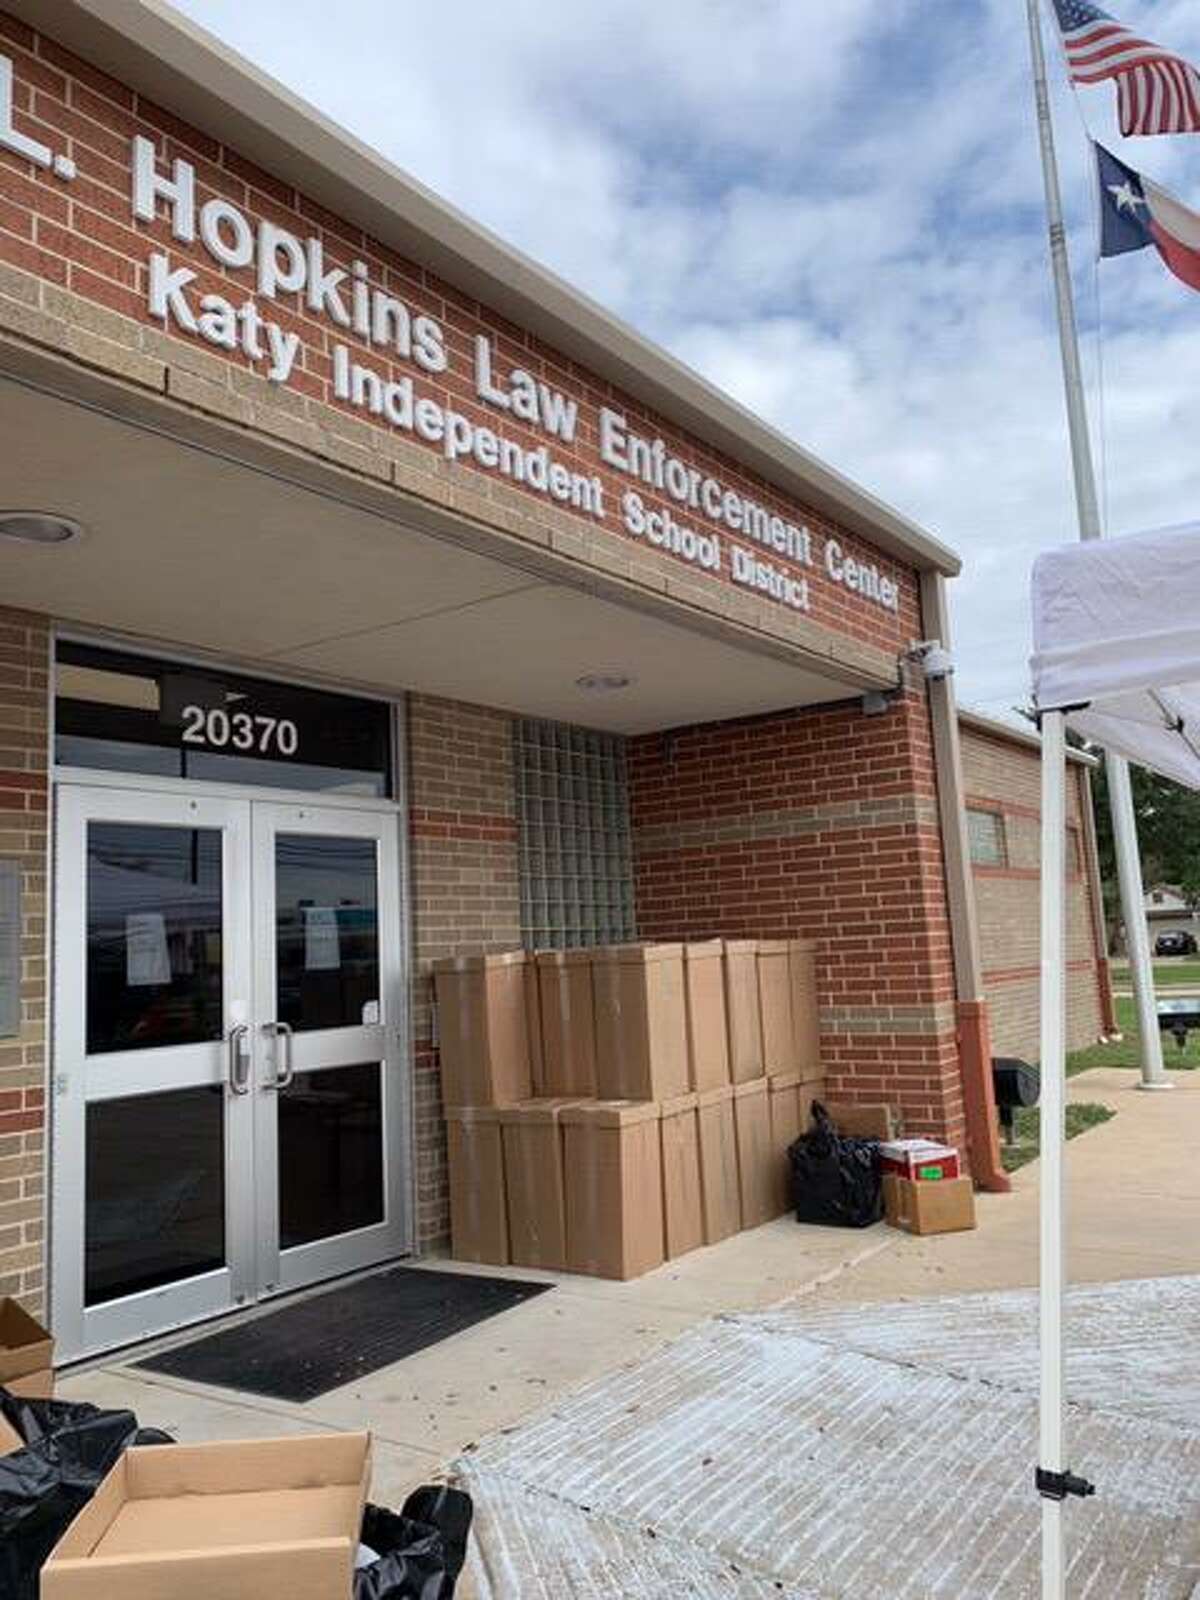 During the 19th Annual National Prescription Drug Take Back event at the Mark L. Hopkins Law Enforcement Center on Saturday, Oct. 24, the Katy Independent School District Police Department collected 39 boxes of unused and expired prescription drugs to be destroyed so they would not pose a health risk.